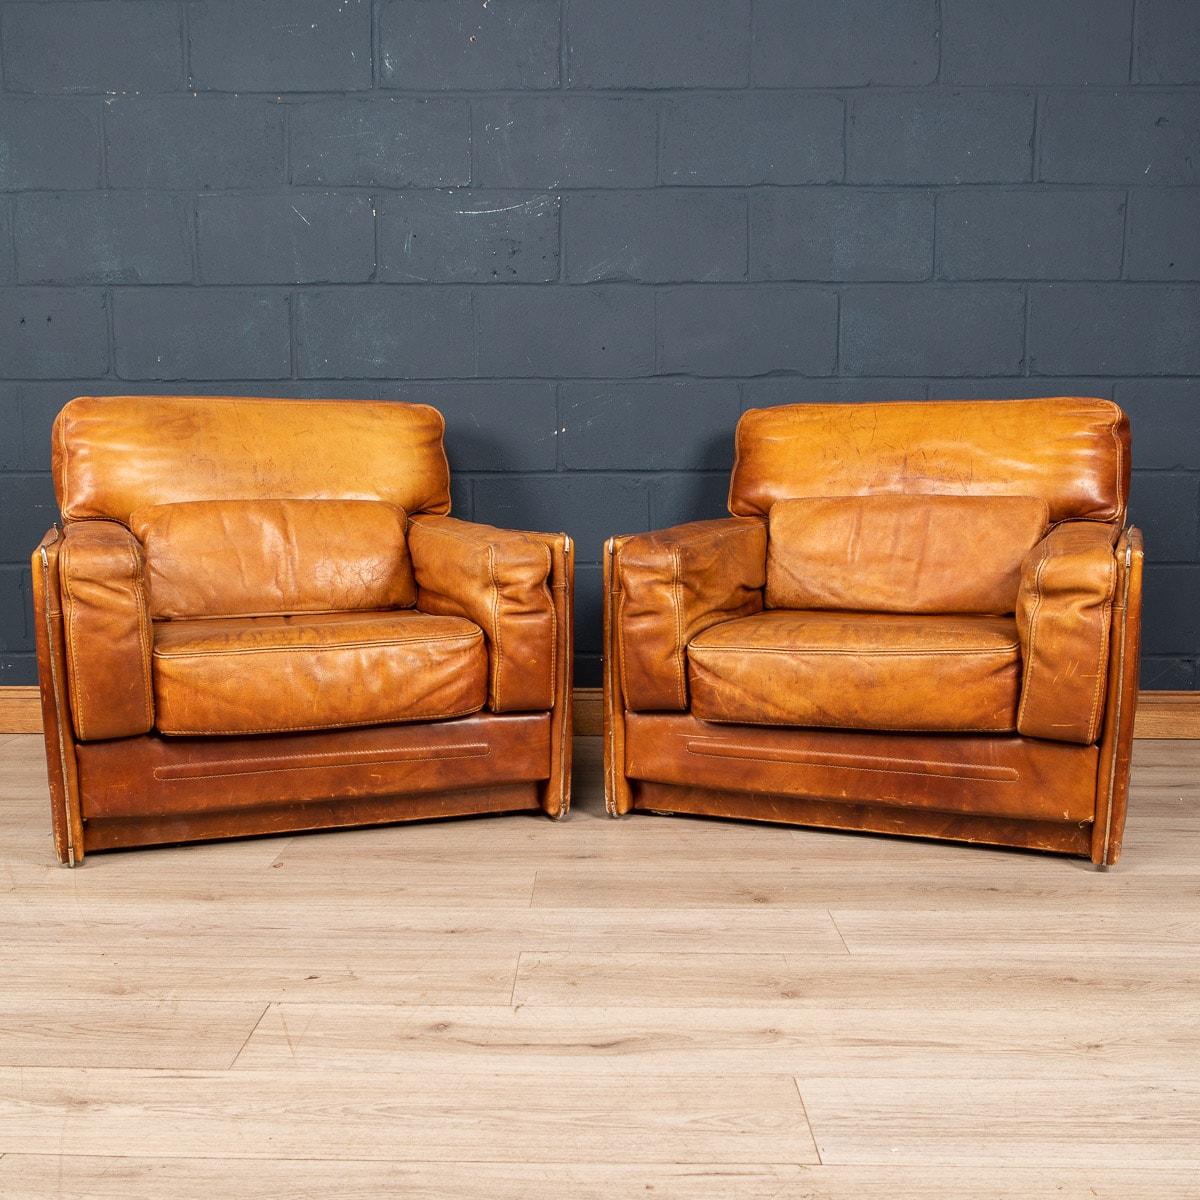 A beautiful pair of leather armchairs by Roche Bobois, made in France in the 1960s/1970s. The chairs are of wonderful quality, finished in the finest leather and majestic in size and extremely comfortable.

Condition
In Good Condition - wear